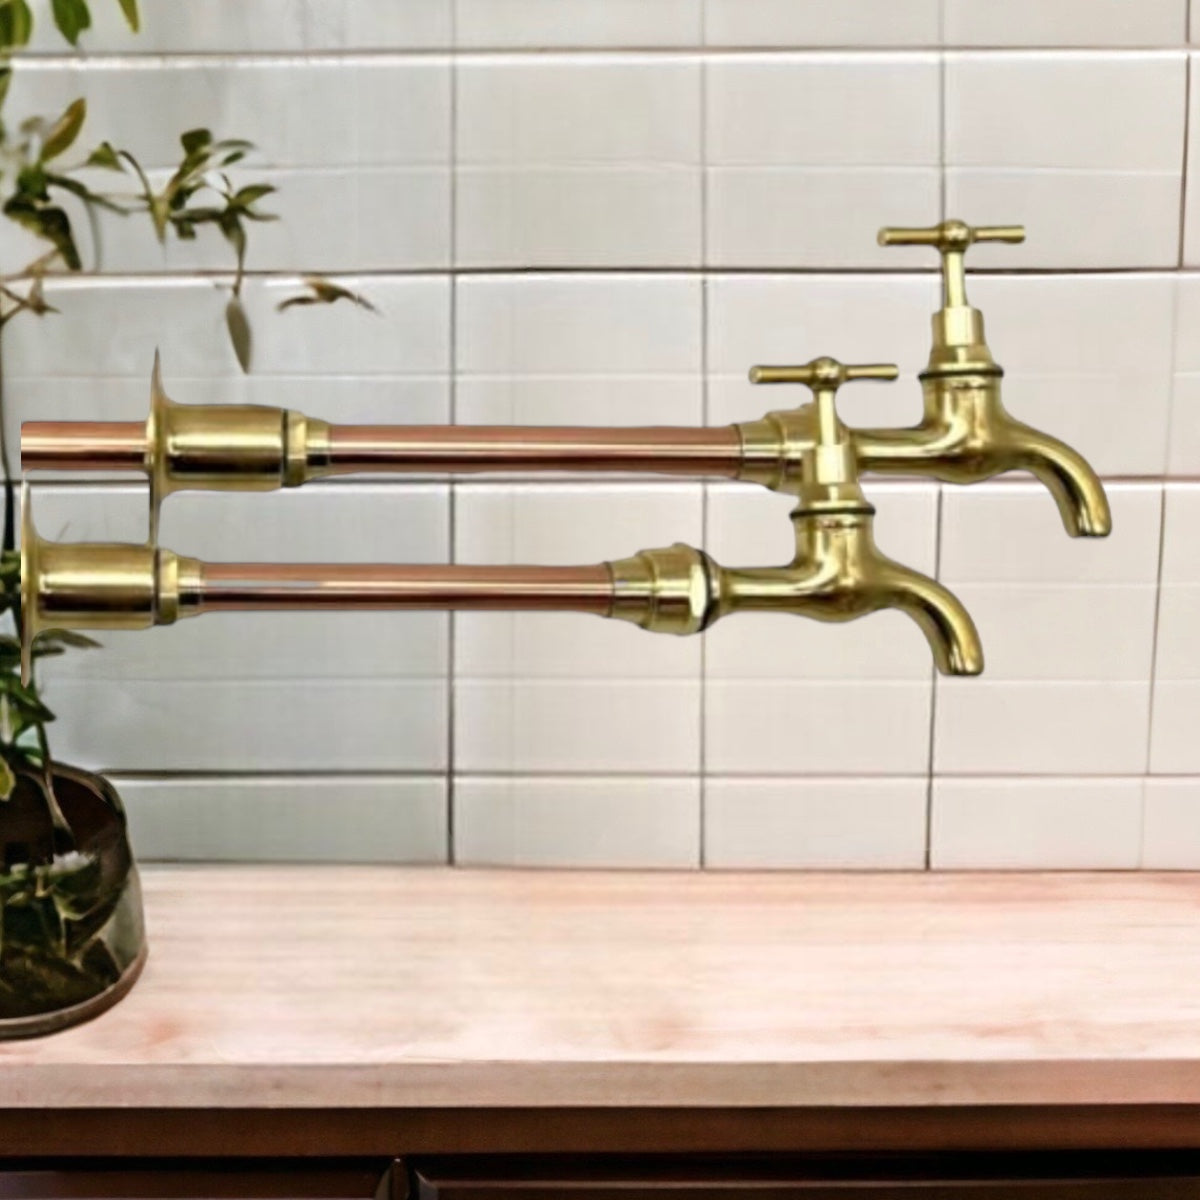 image pair of copper and brass wall mounted taps on a tiled background 